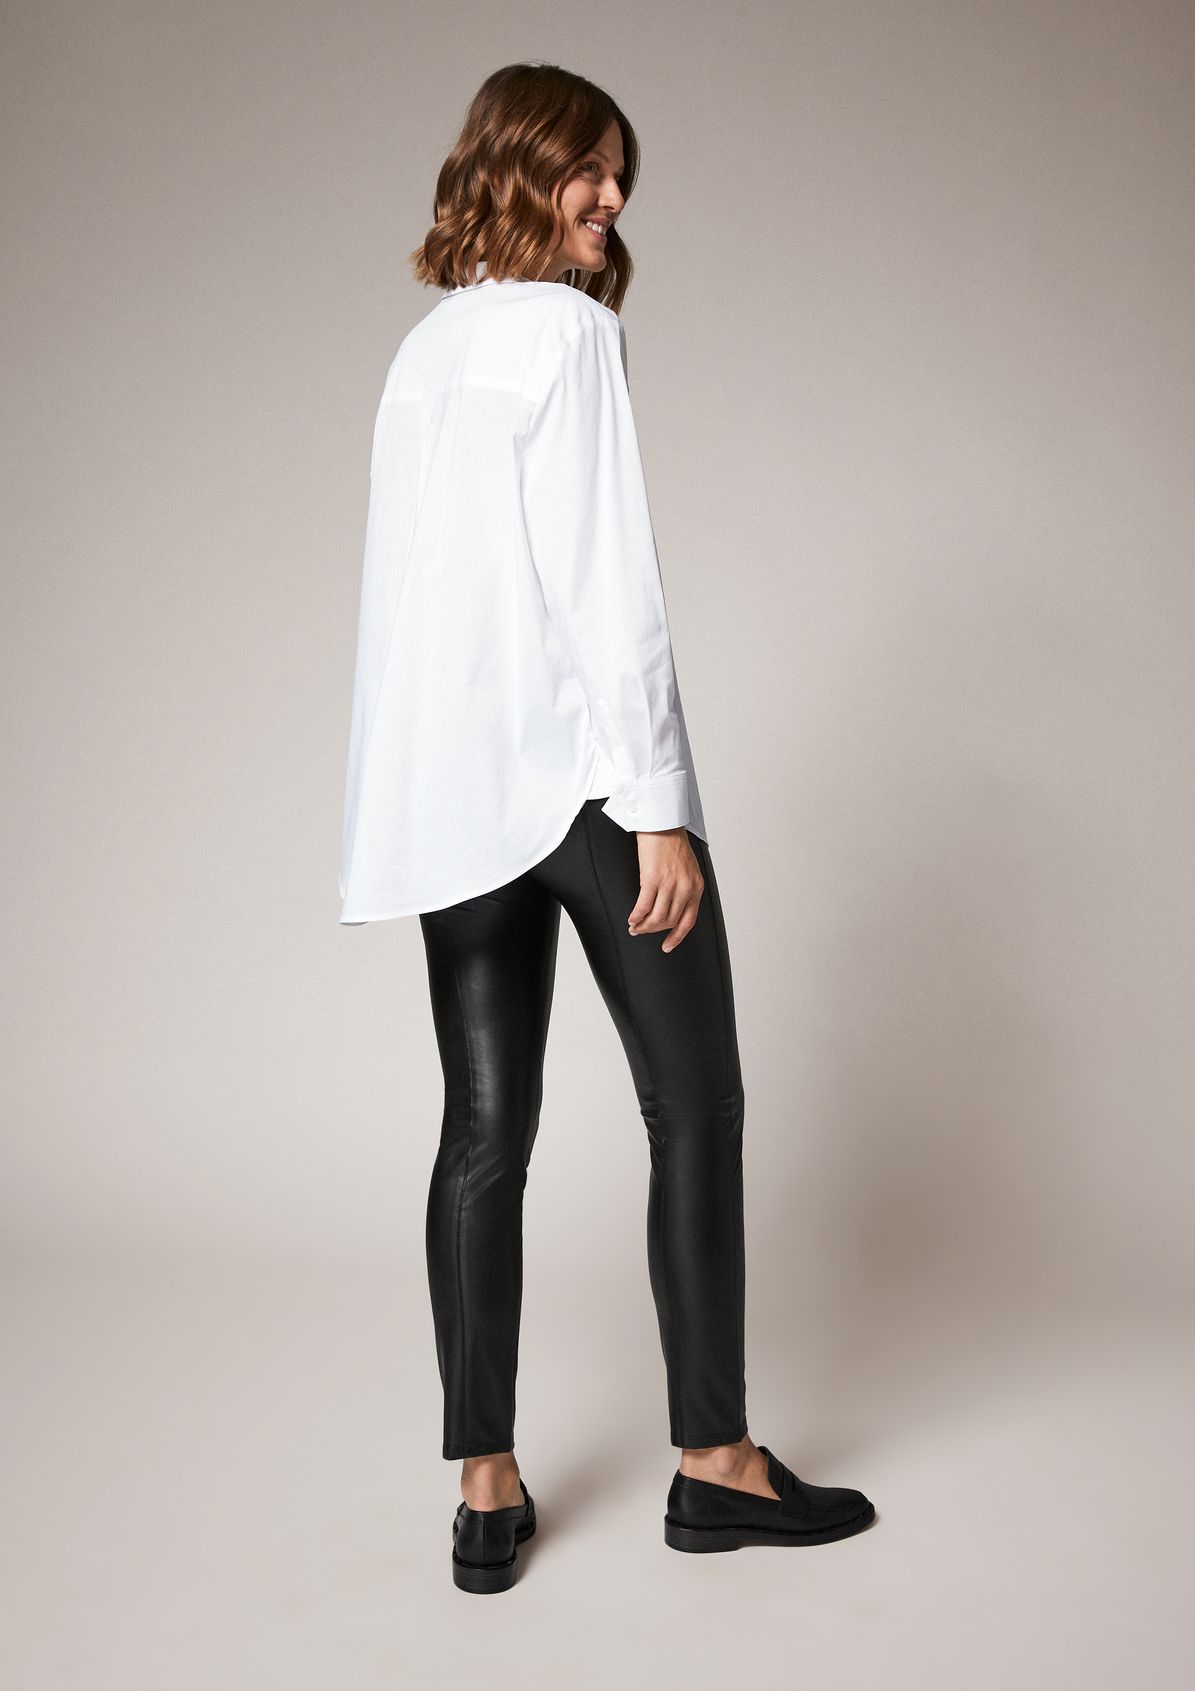 Blouse in a clean look from comma